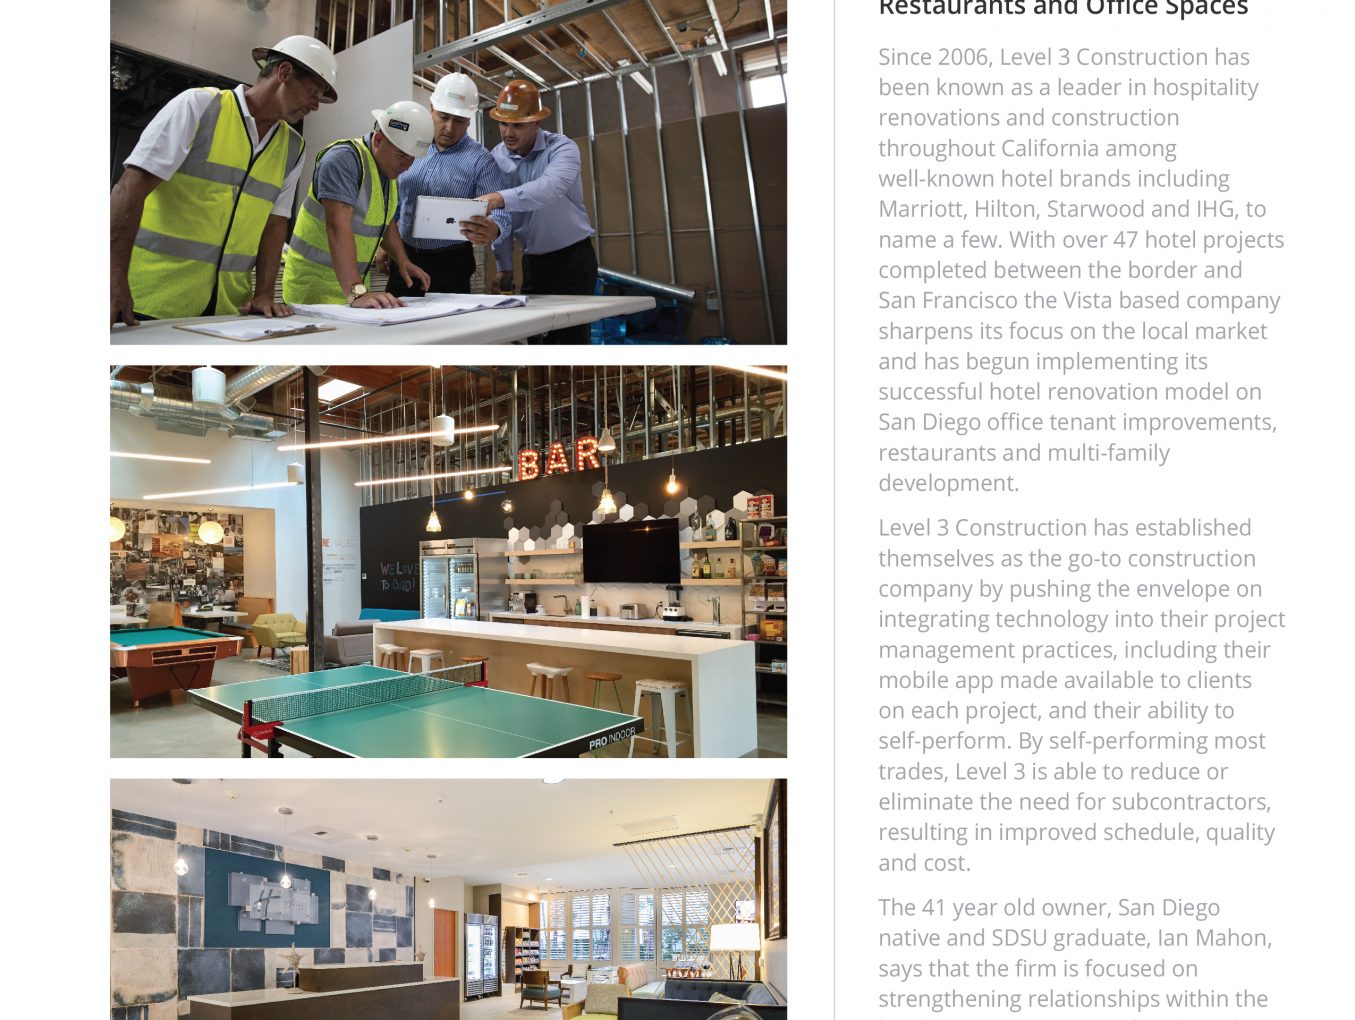 CREW San Diego features Level 3 Construction as Gold Sponsor Highlight in Quarterly Newsletter